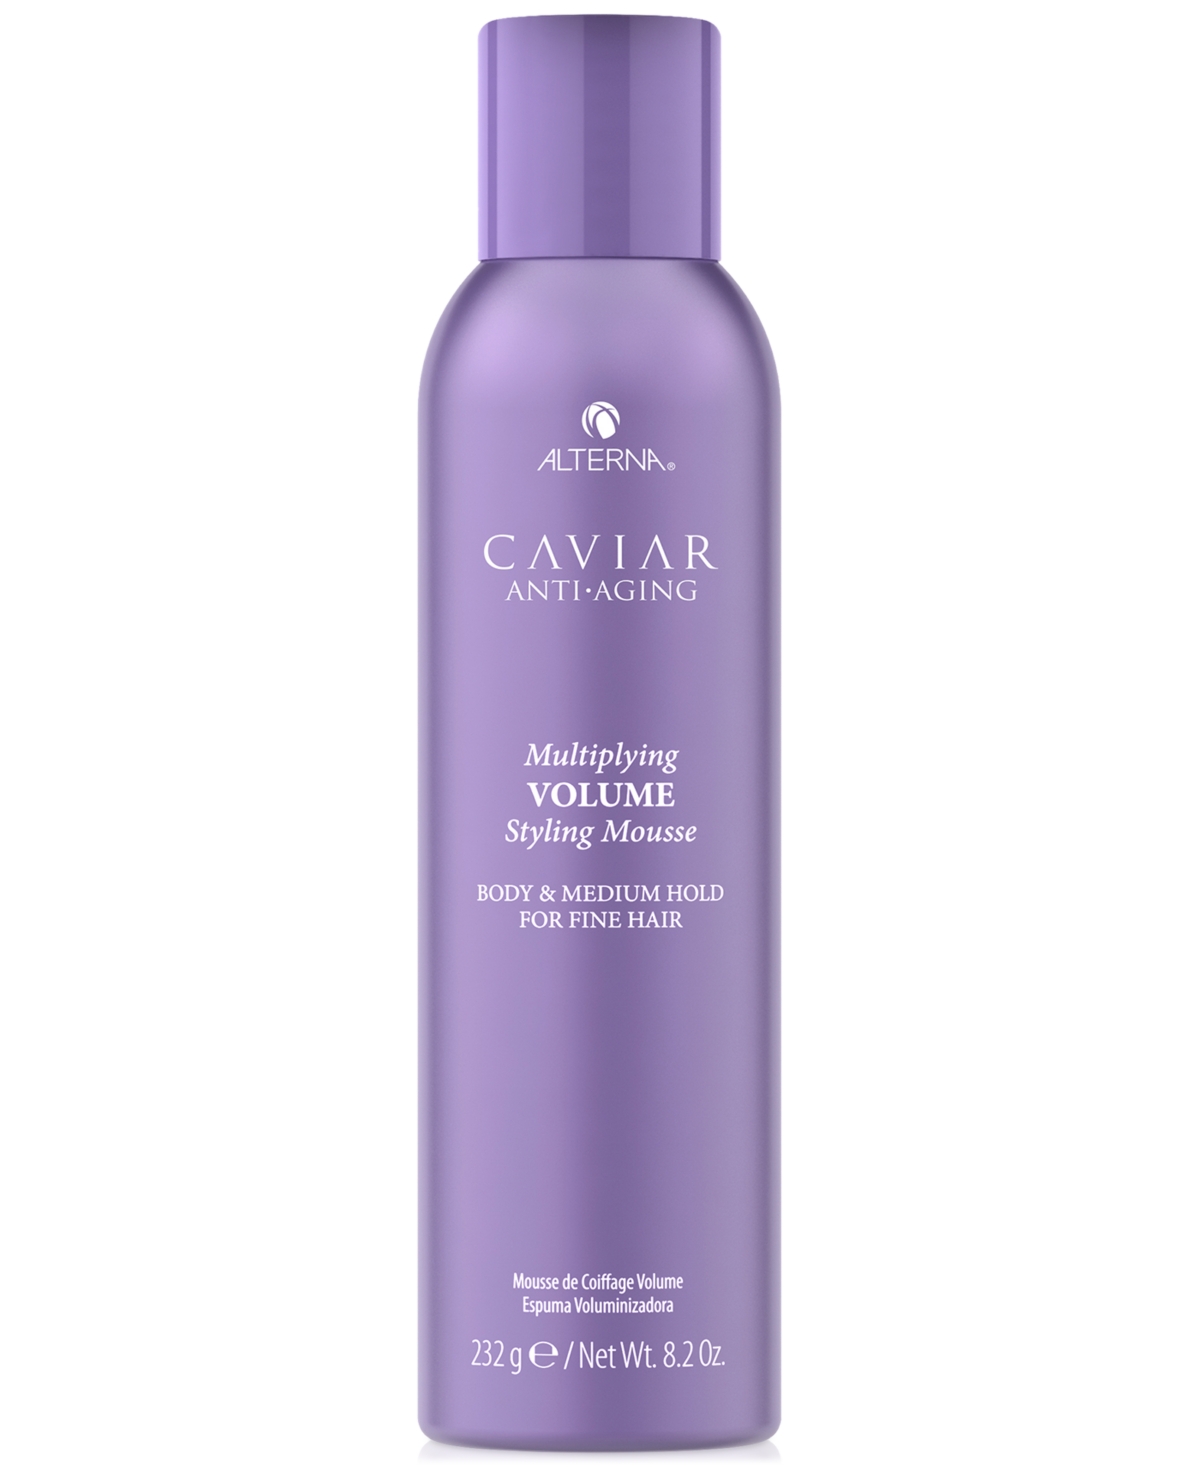 Caviar Multiplying Volume Styling Mousse, 8.2 oz.